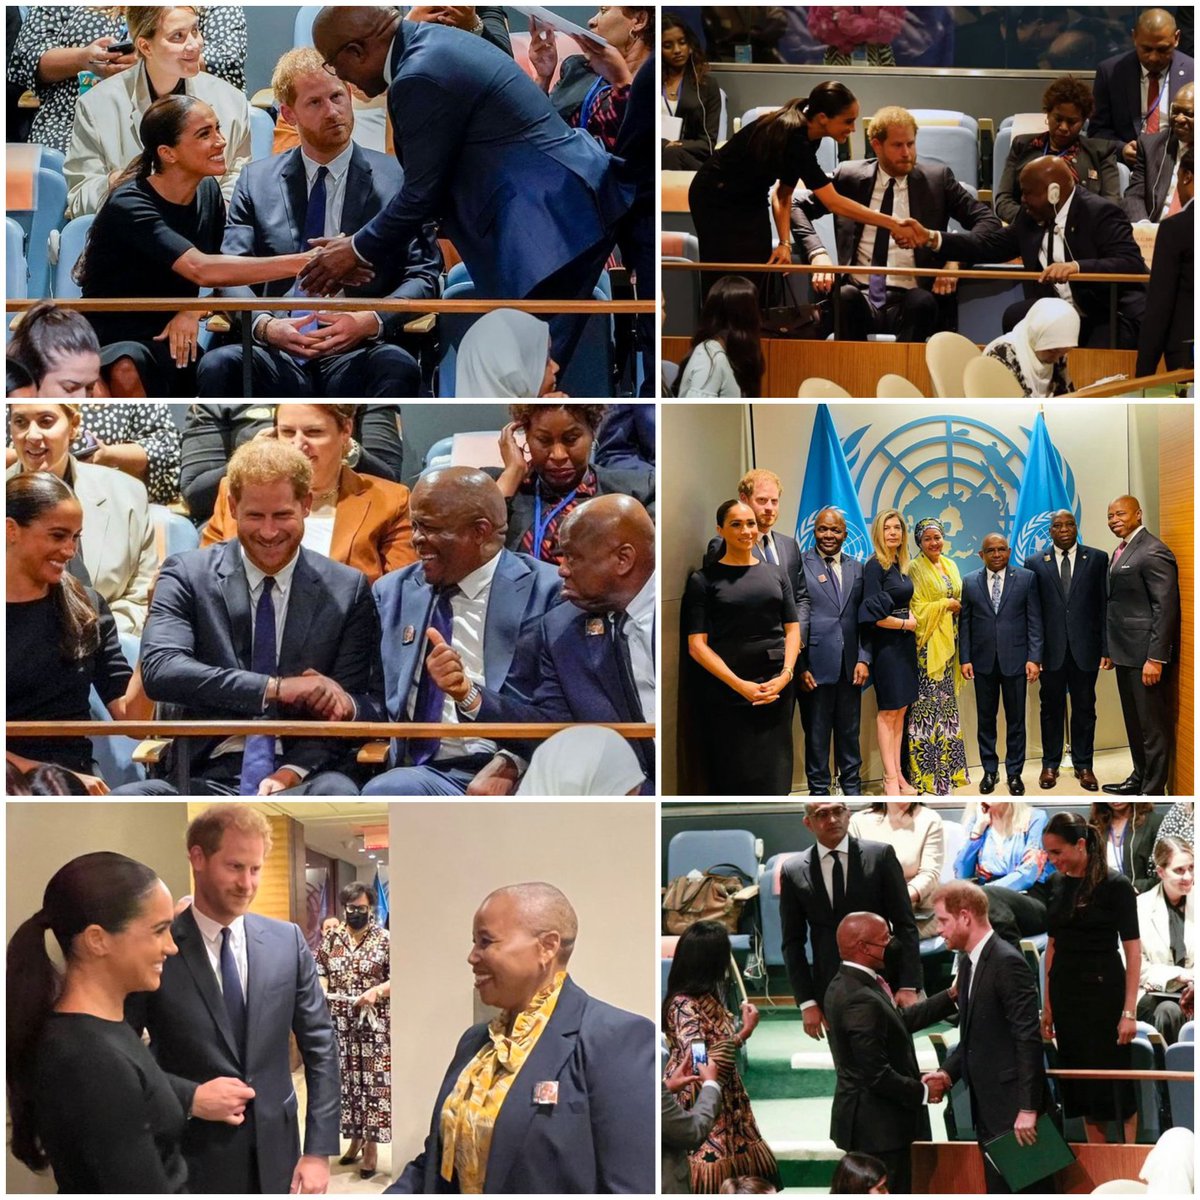 News in Brief:  Positive people around the world love #PrinceHarry and #PrincessMeghan and it's evident to see! #PrinceHarryAtTheUN #MandelaDay2022 #QueenMeghan  #DuchessMeghan #KingHarry #Sussexsquad